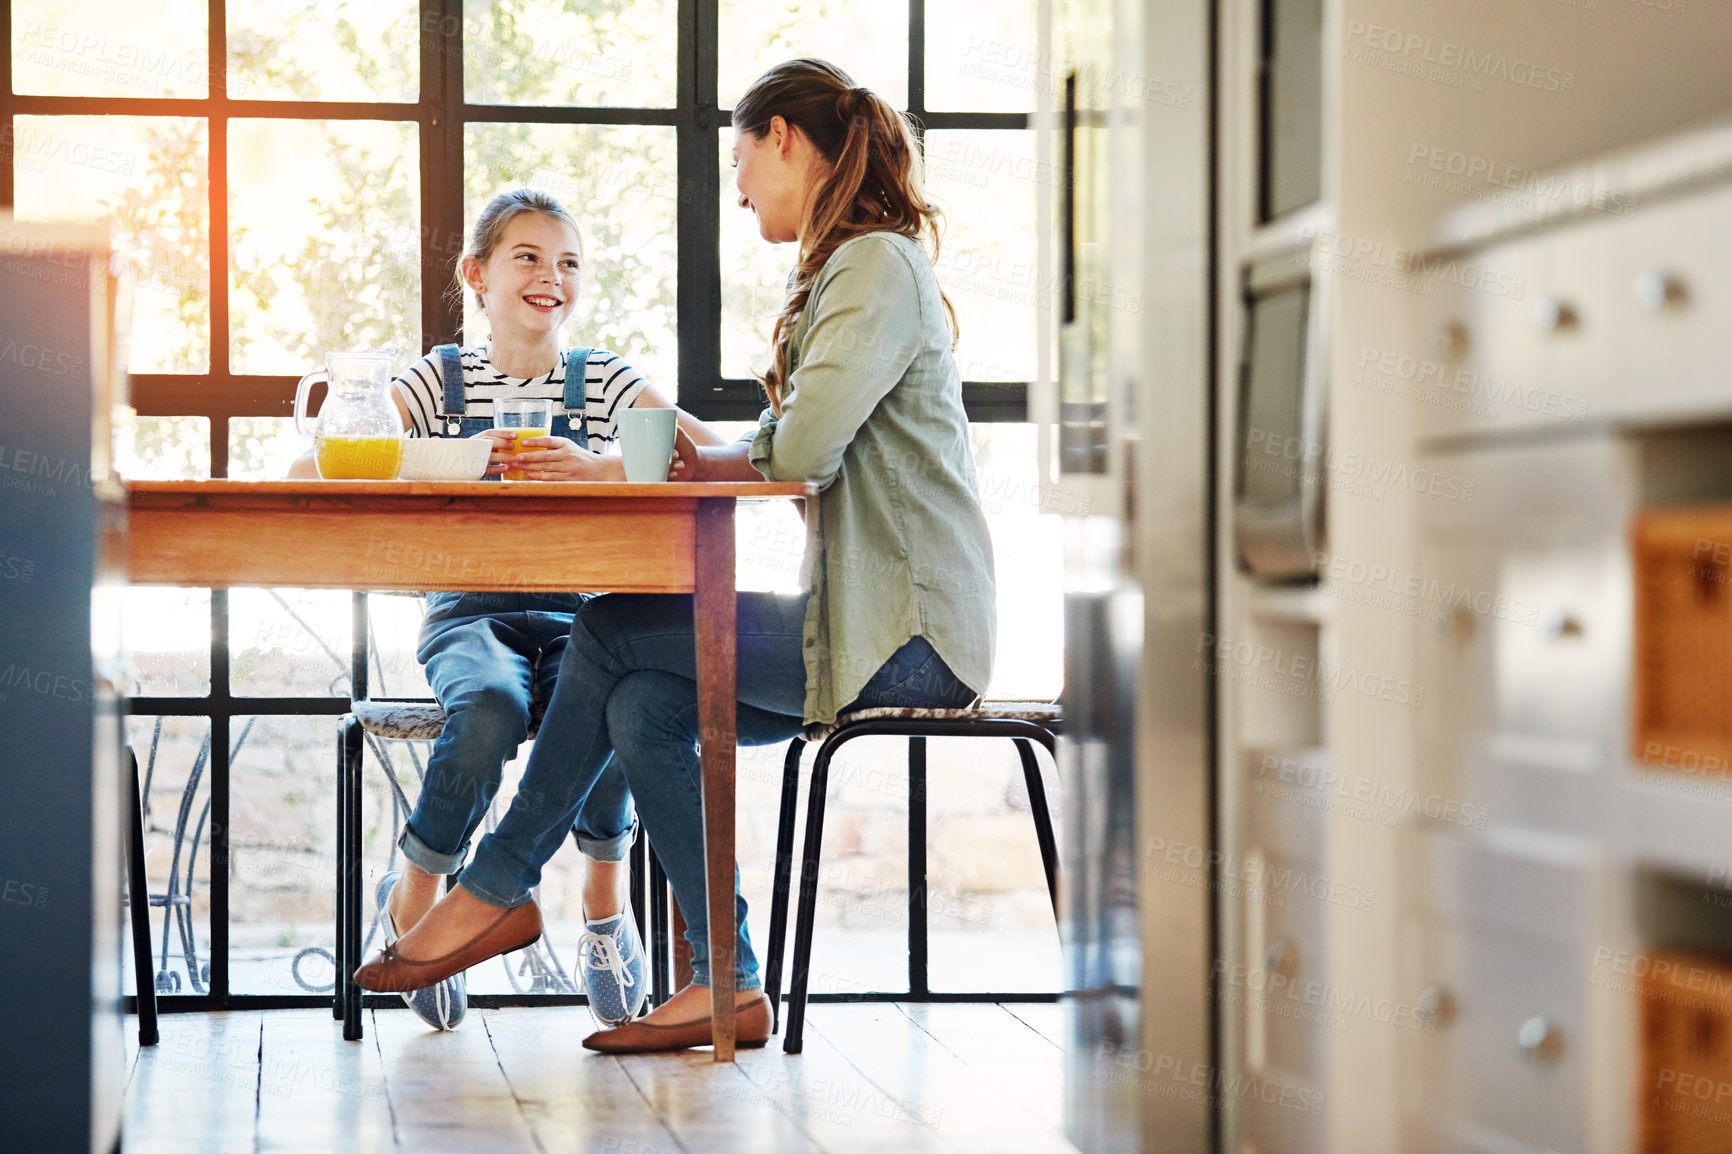 Buy stock photo Shot of a happy mother and daughter enjoying breakfast together at home